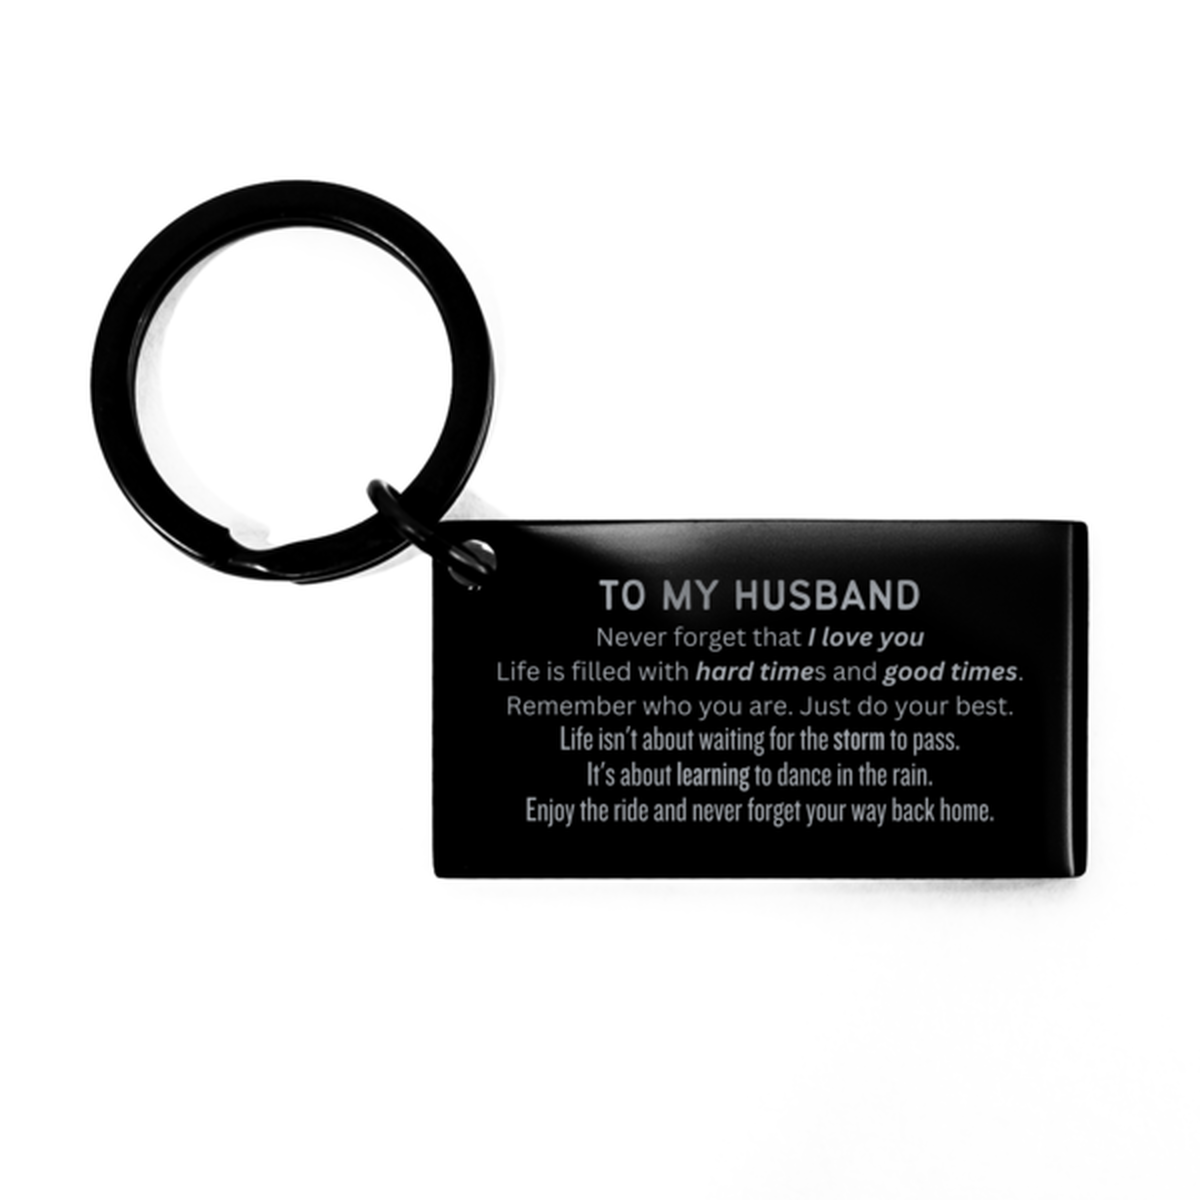 Christmas Husband Keychain Gifts, To My Husband Birthday Thank You Gifts For Husband, Graduation Unique Gifts For Husband To My Husband Never forget that I love you life is filled with hard times and good times. Remember who you are. Just do your best